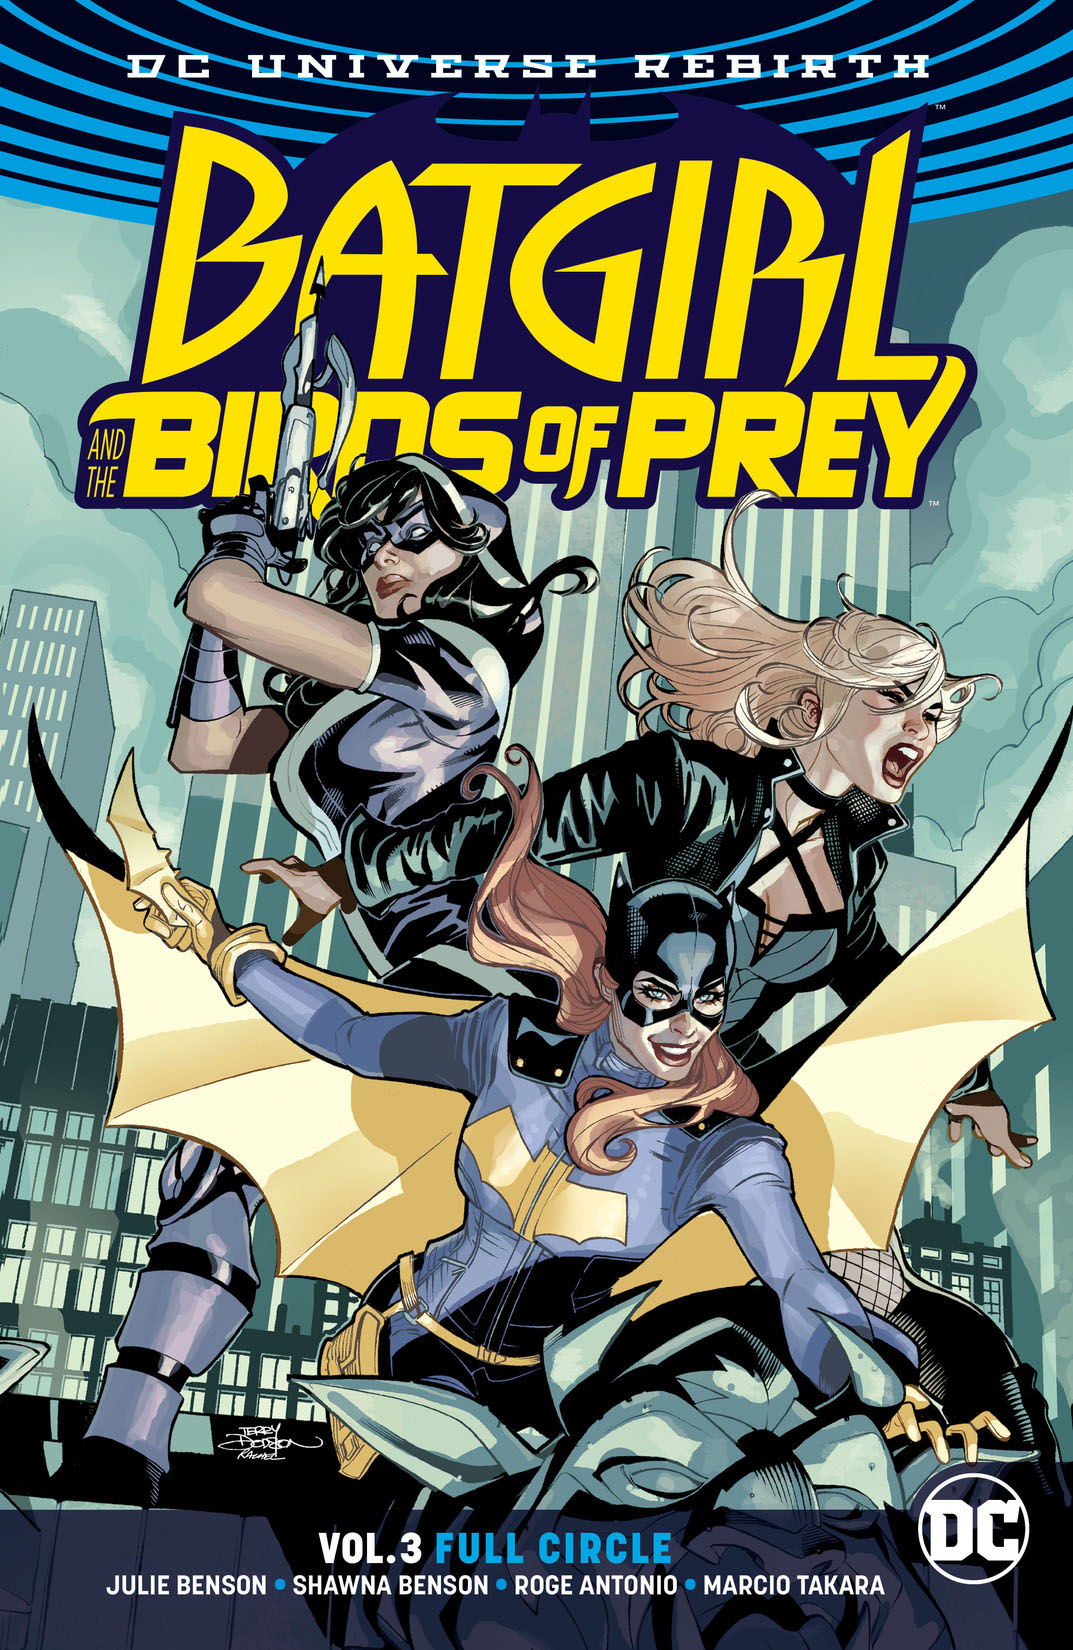 Batgirl and the Birds of Prey Vol. 3: Full Circle preview images